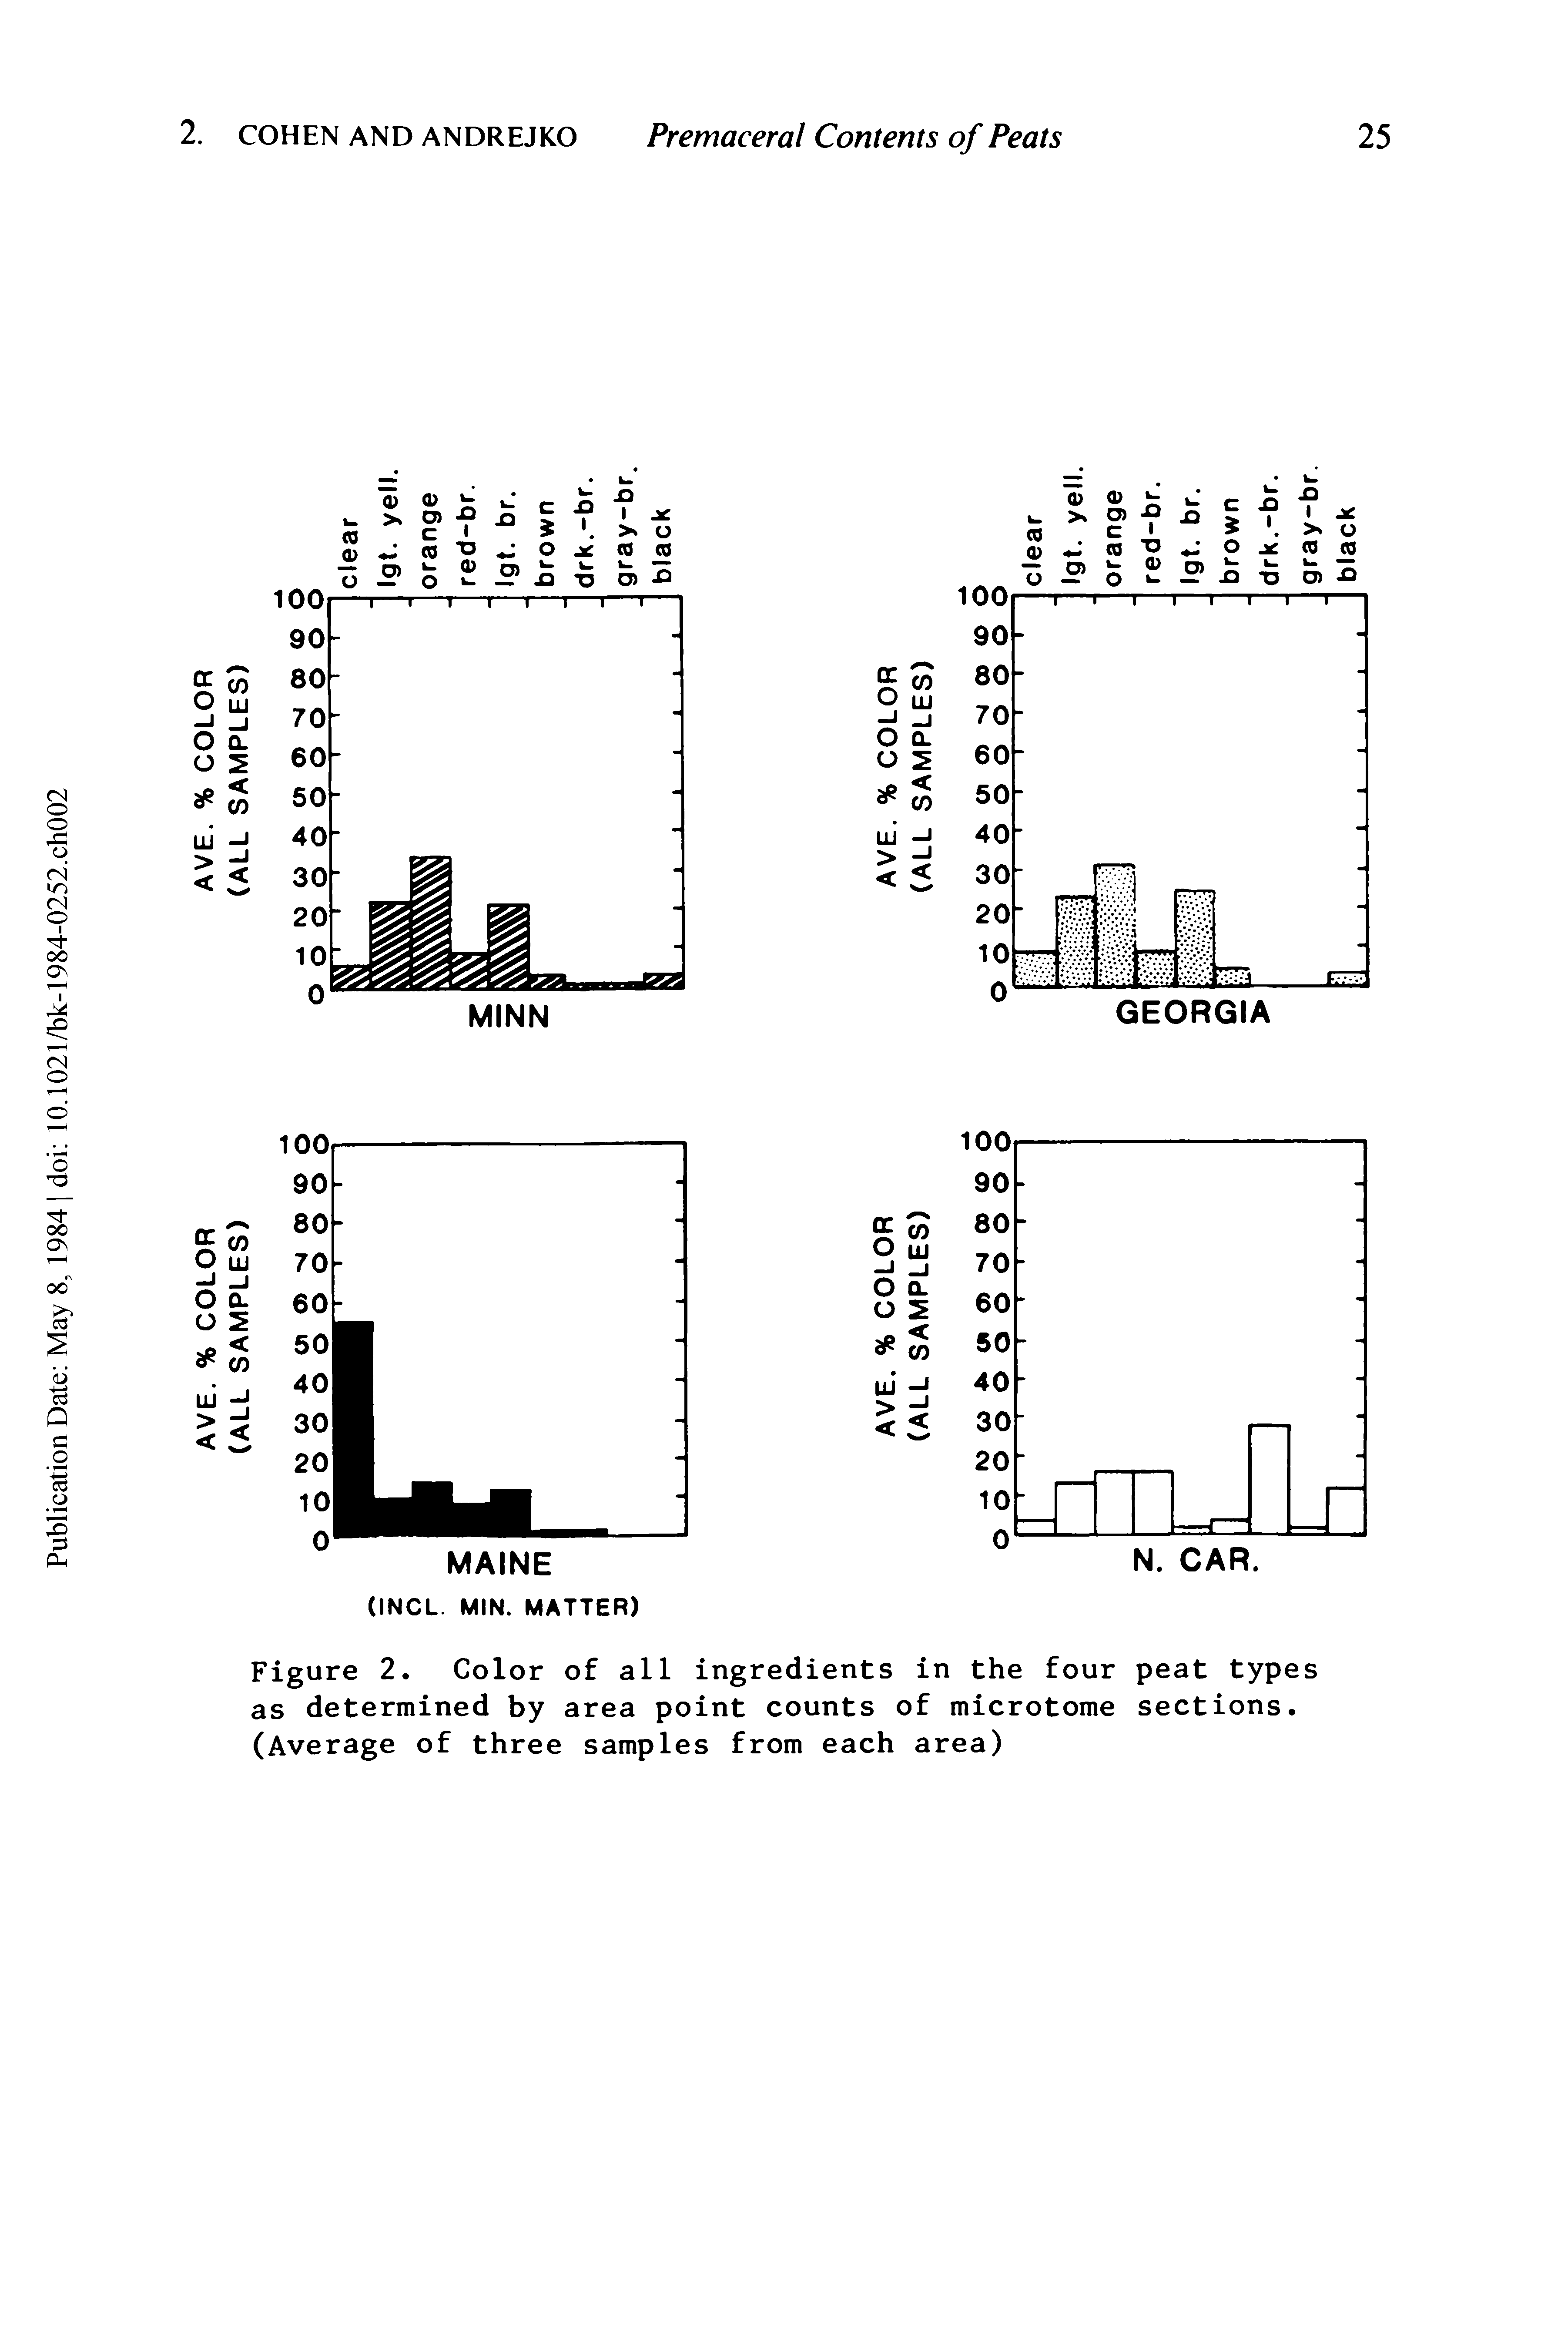 Figure 2. Color of all ingredients in the four peat types as determined by area point counts of microtome sections. (Average of three samples from each area)...